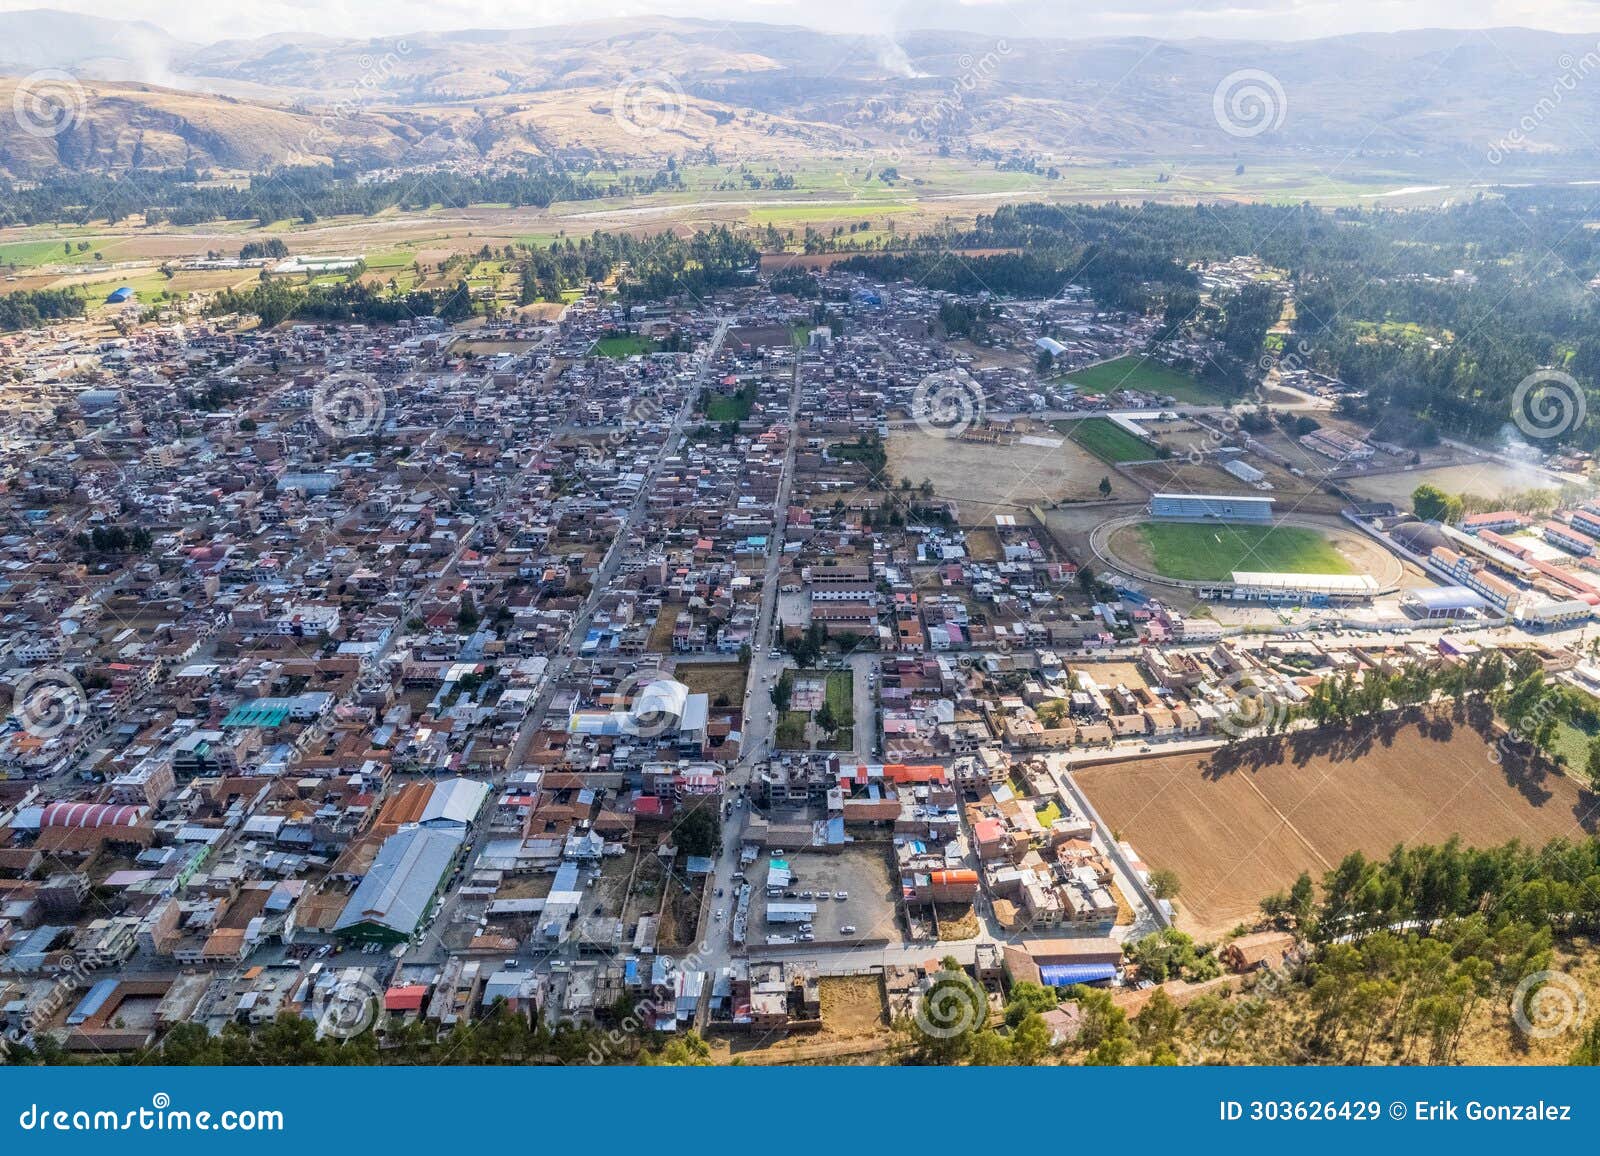 aerial view of the town of concepcion in junin